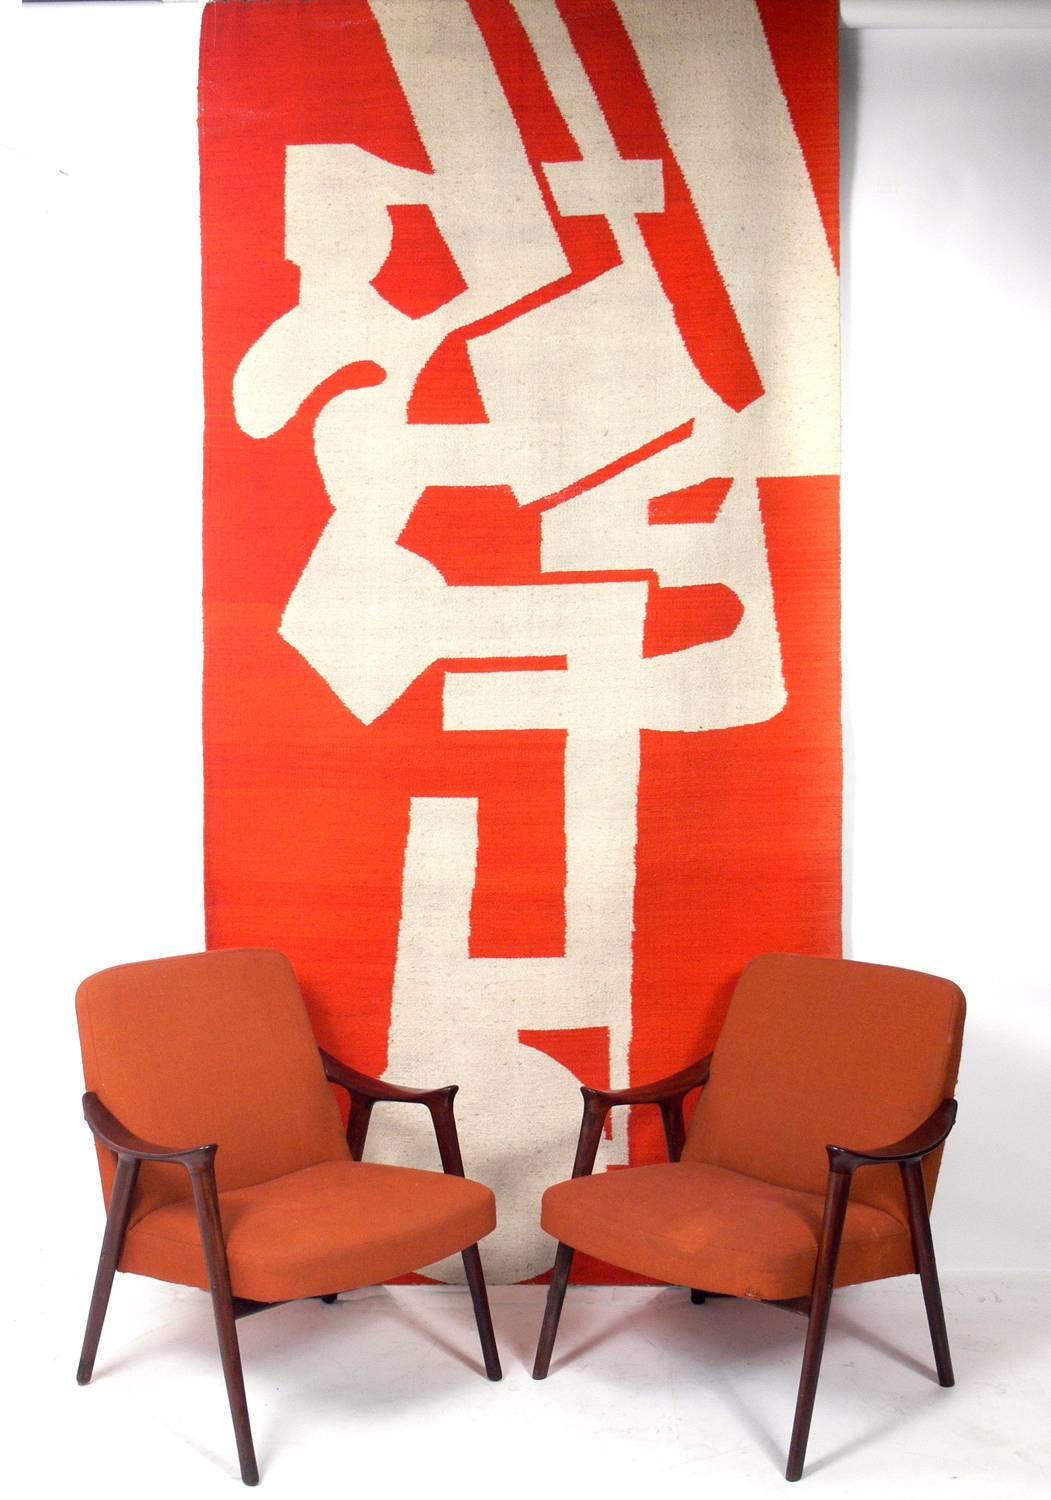 French Large-Scale Modernist Tapestry in Vibrant Orange and White